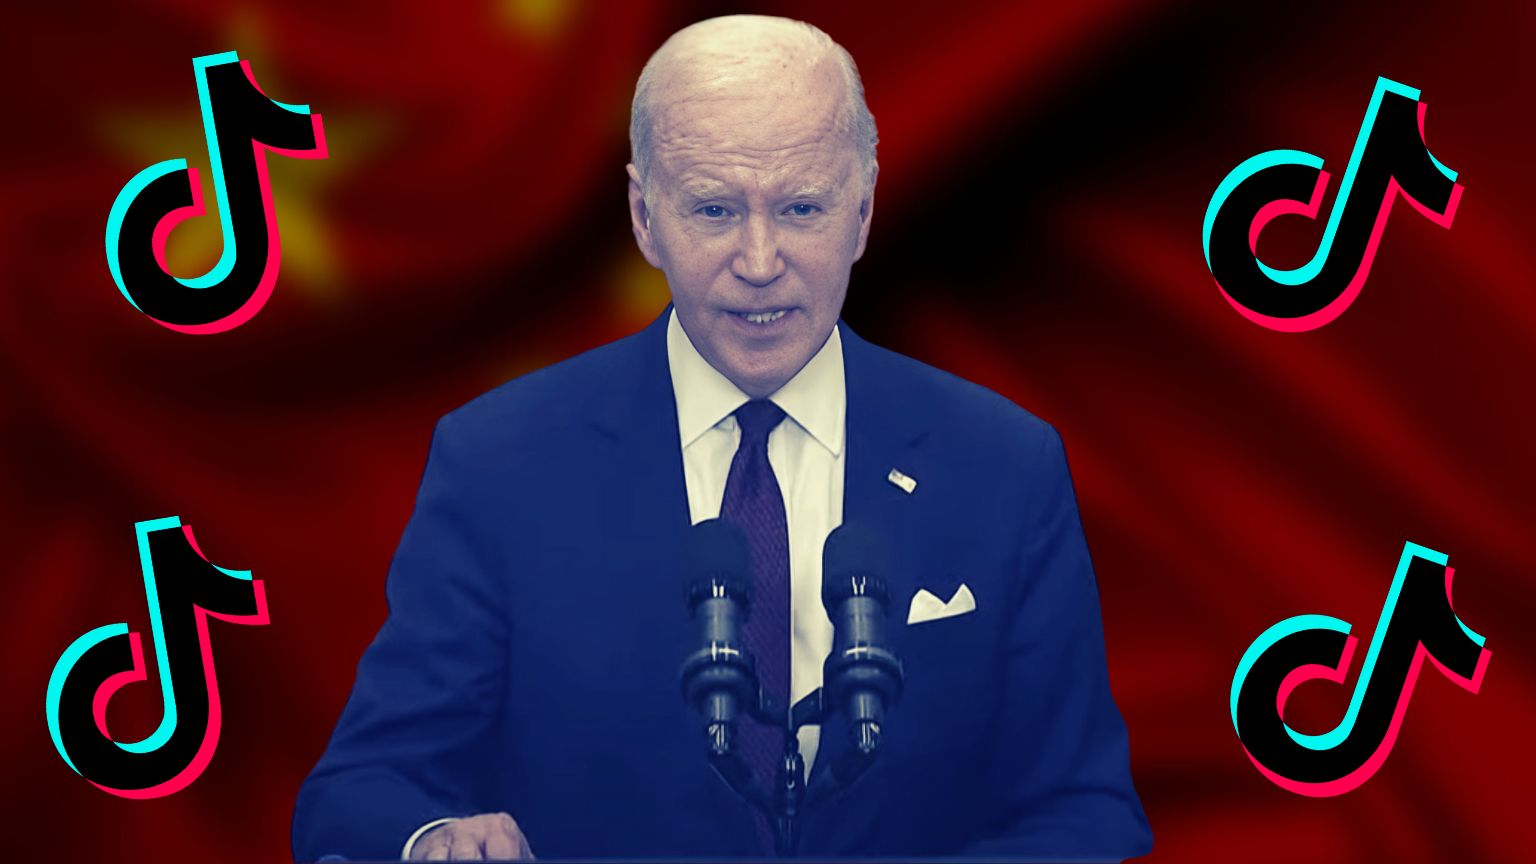 Biden Attempted To Form an Agreement With TikTok That Would Give The US Government Unprecedented Access